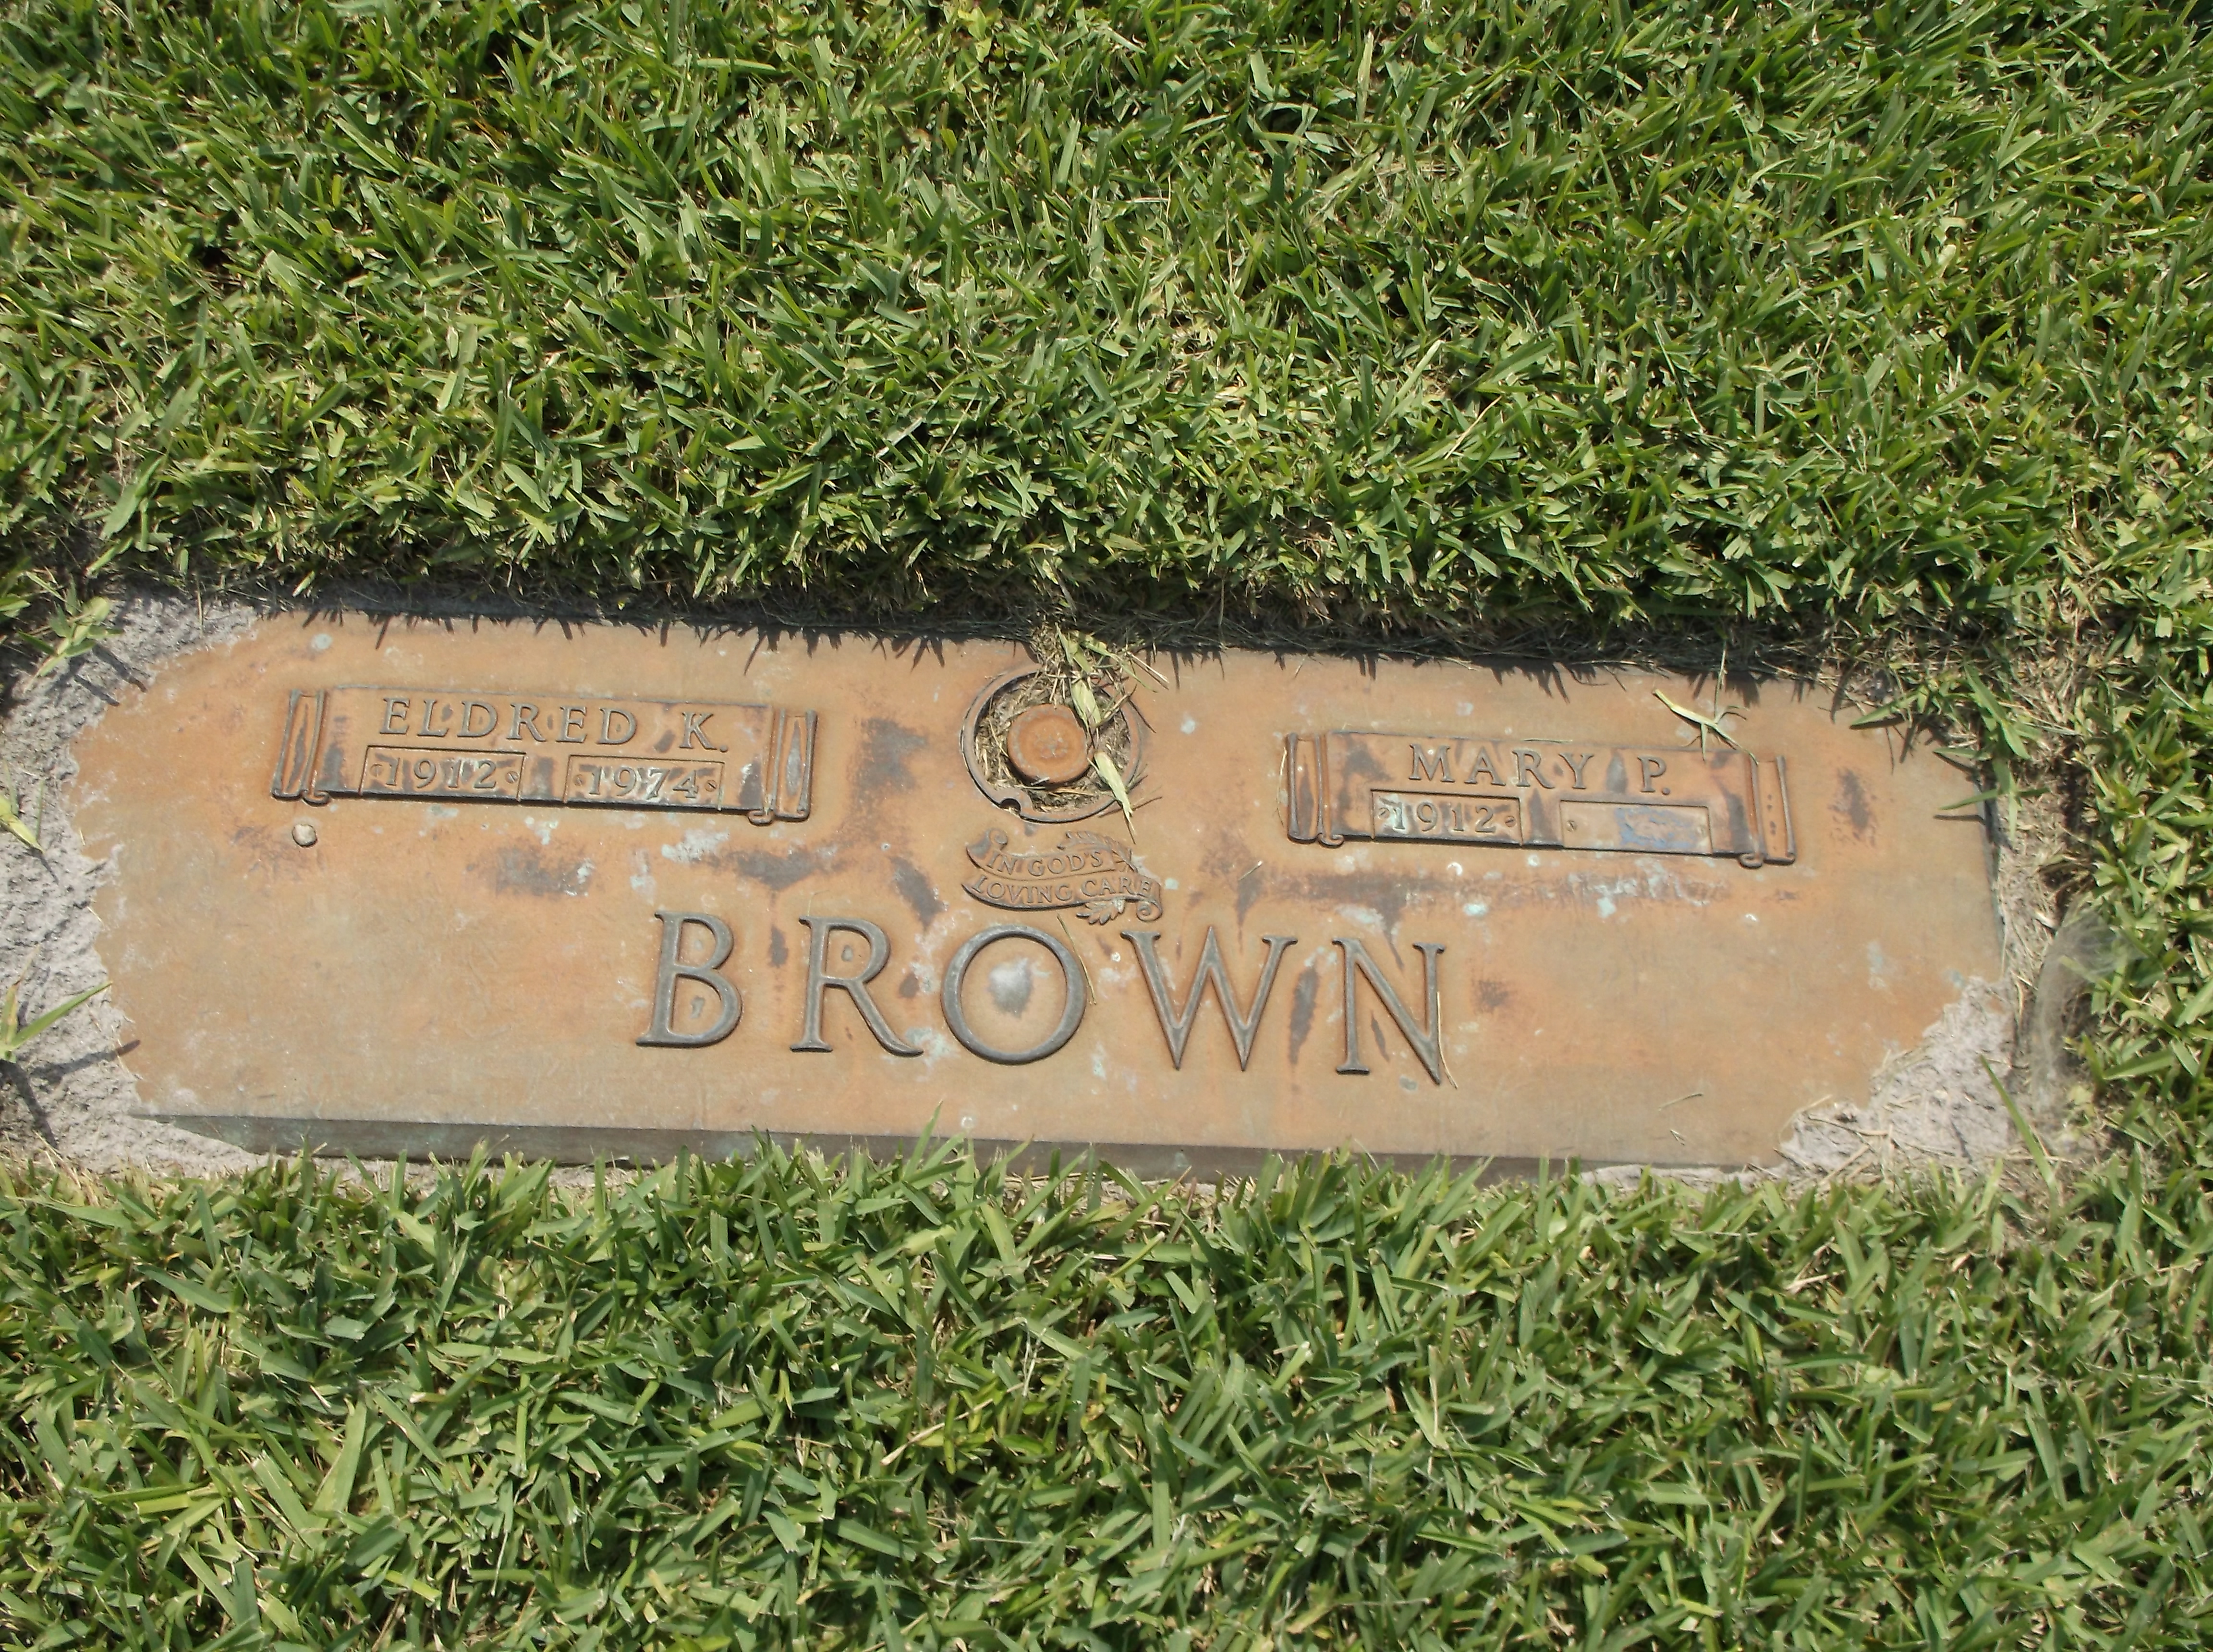 Mary P Brown